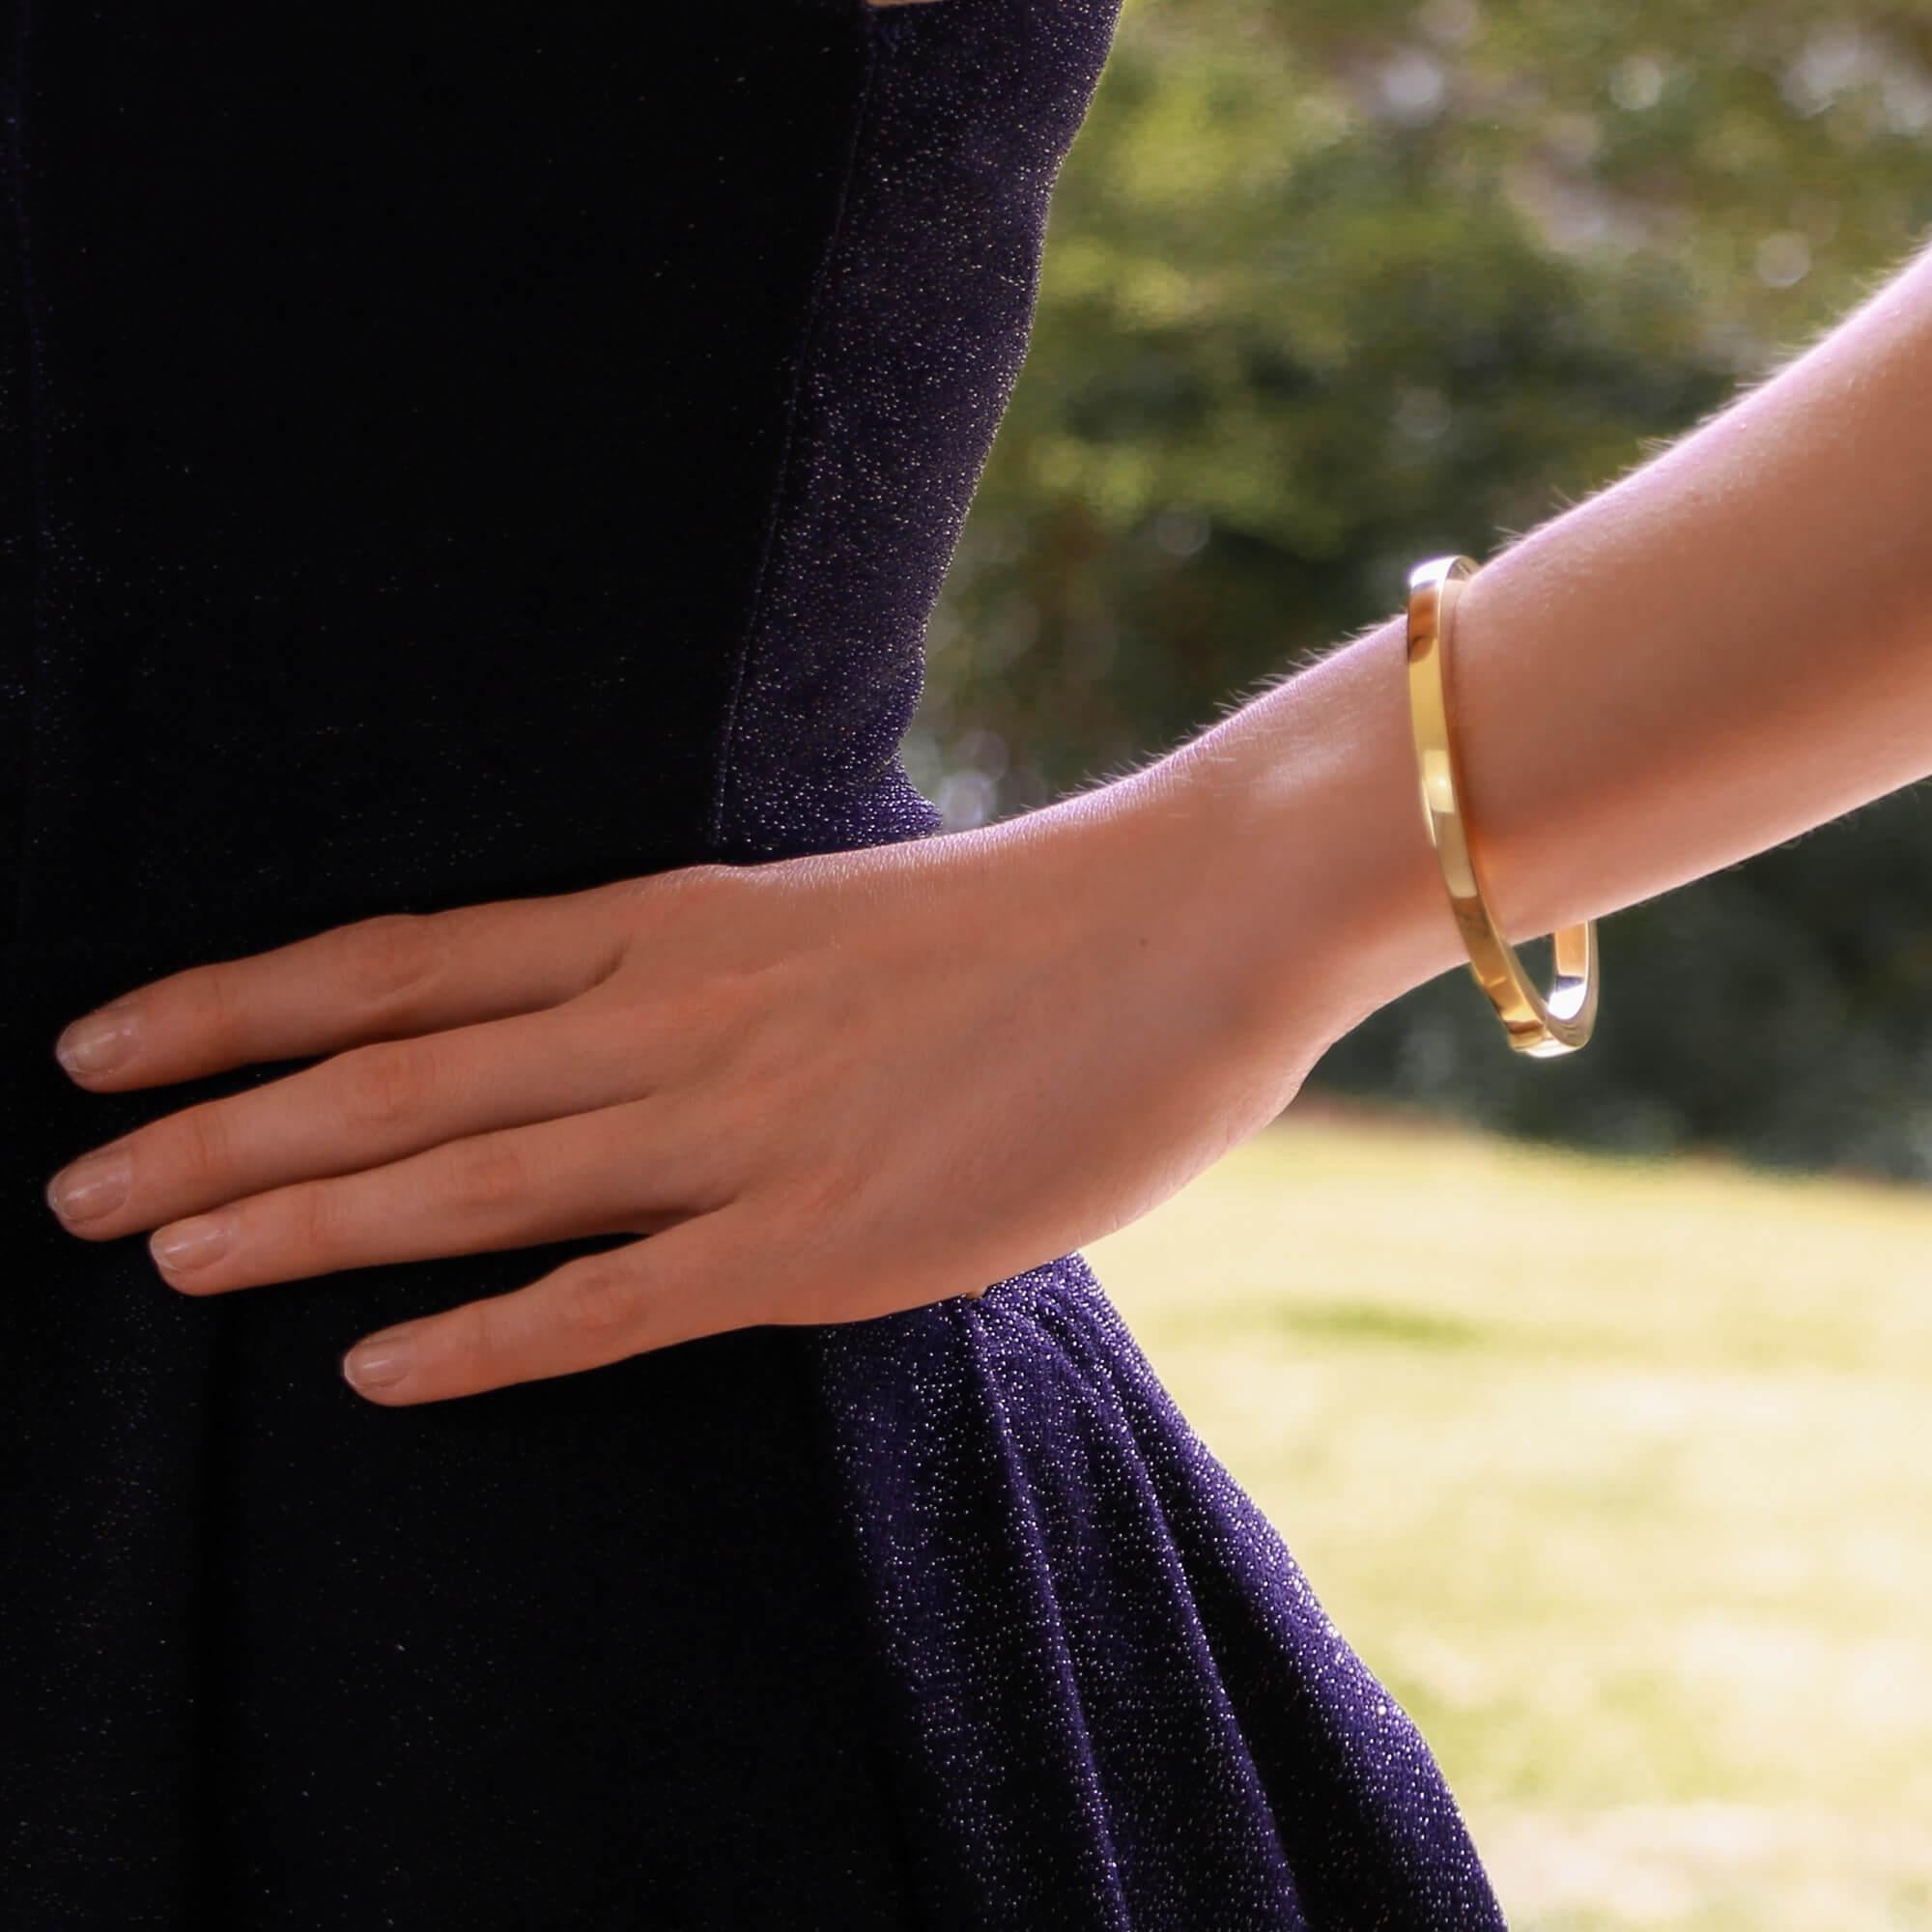 A classic retro chunky bangle set in 18k yellow gold.

Due to the simple elegant design, this piece could be worn for a variety of occasions. The piece could be worn by itself, or alternatively, stacked up amongst other jewelry pieces. The bangle is